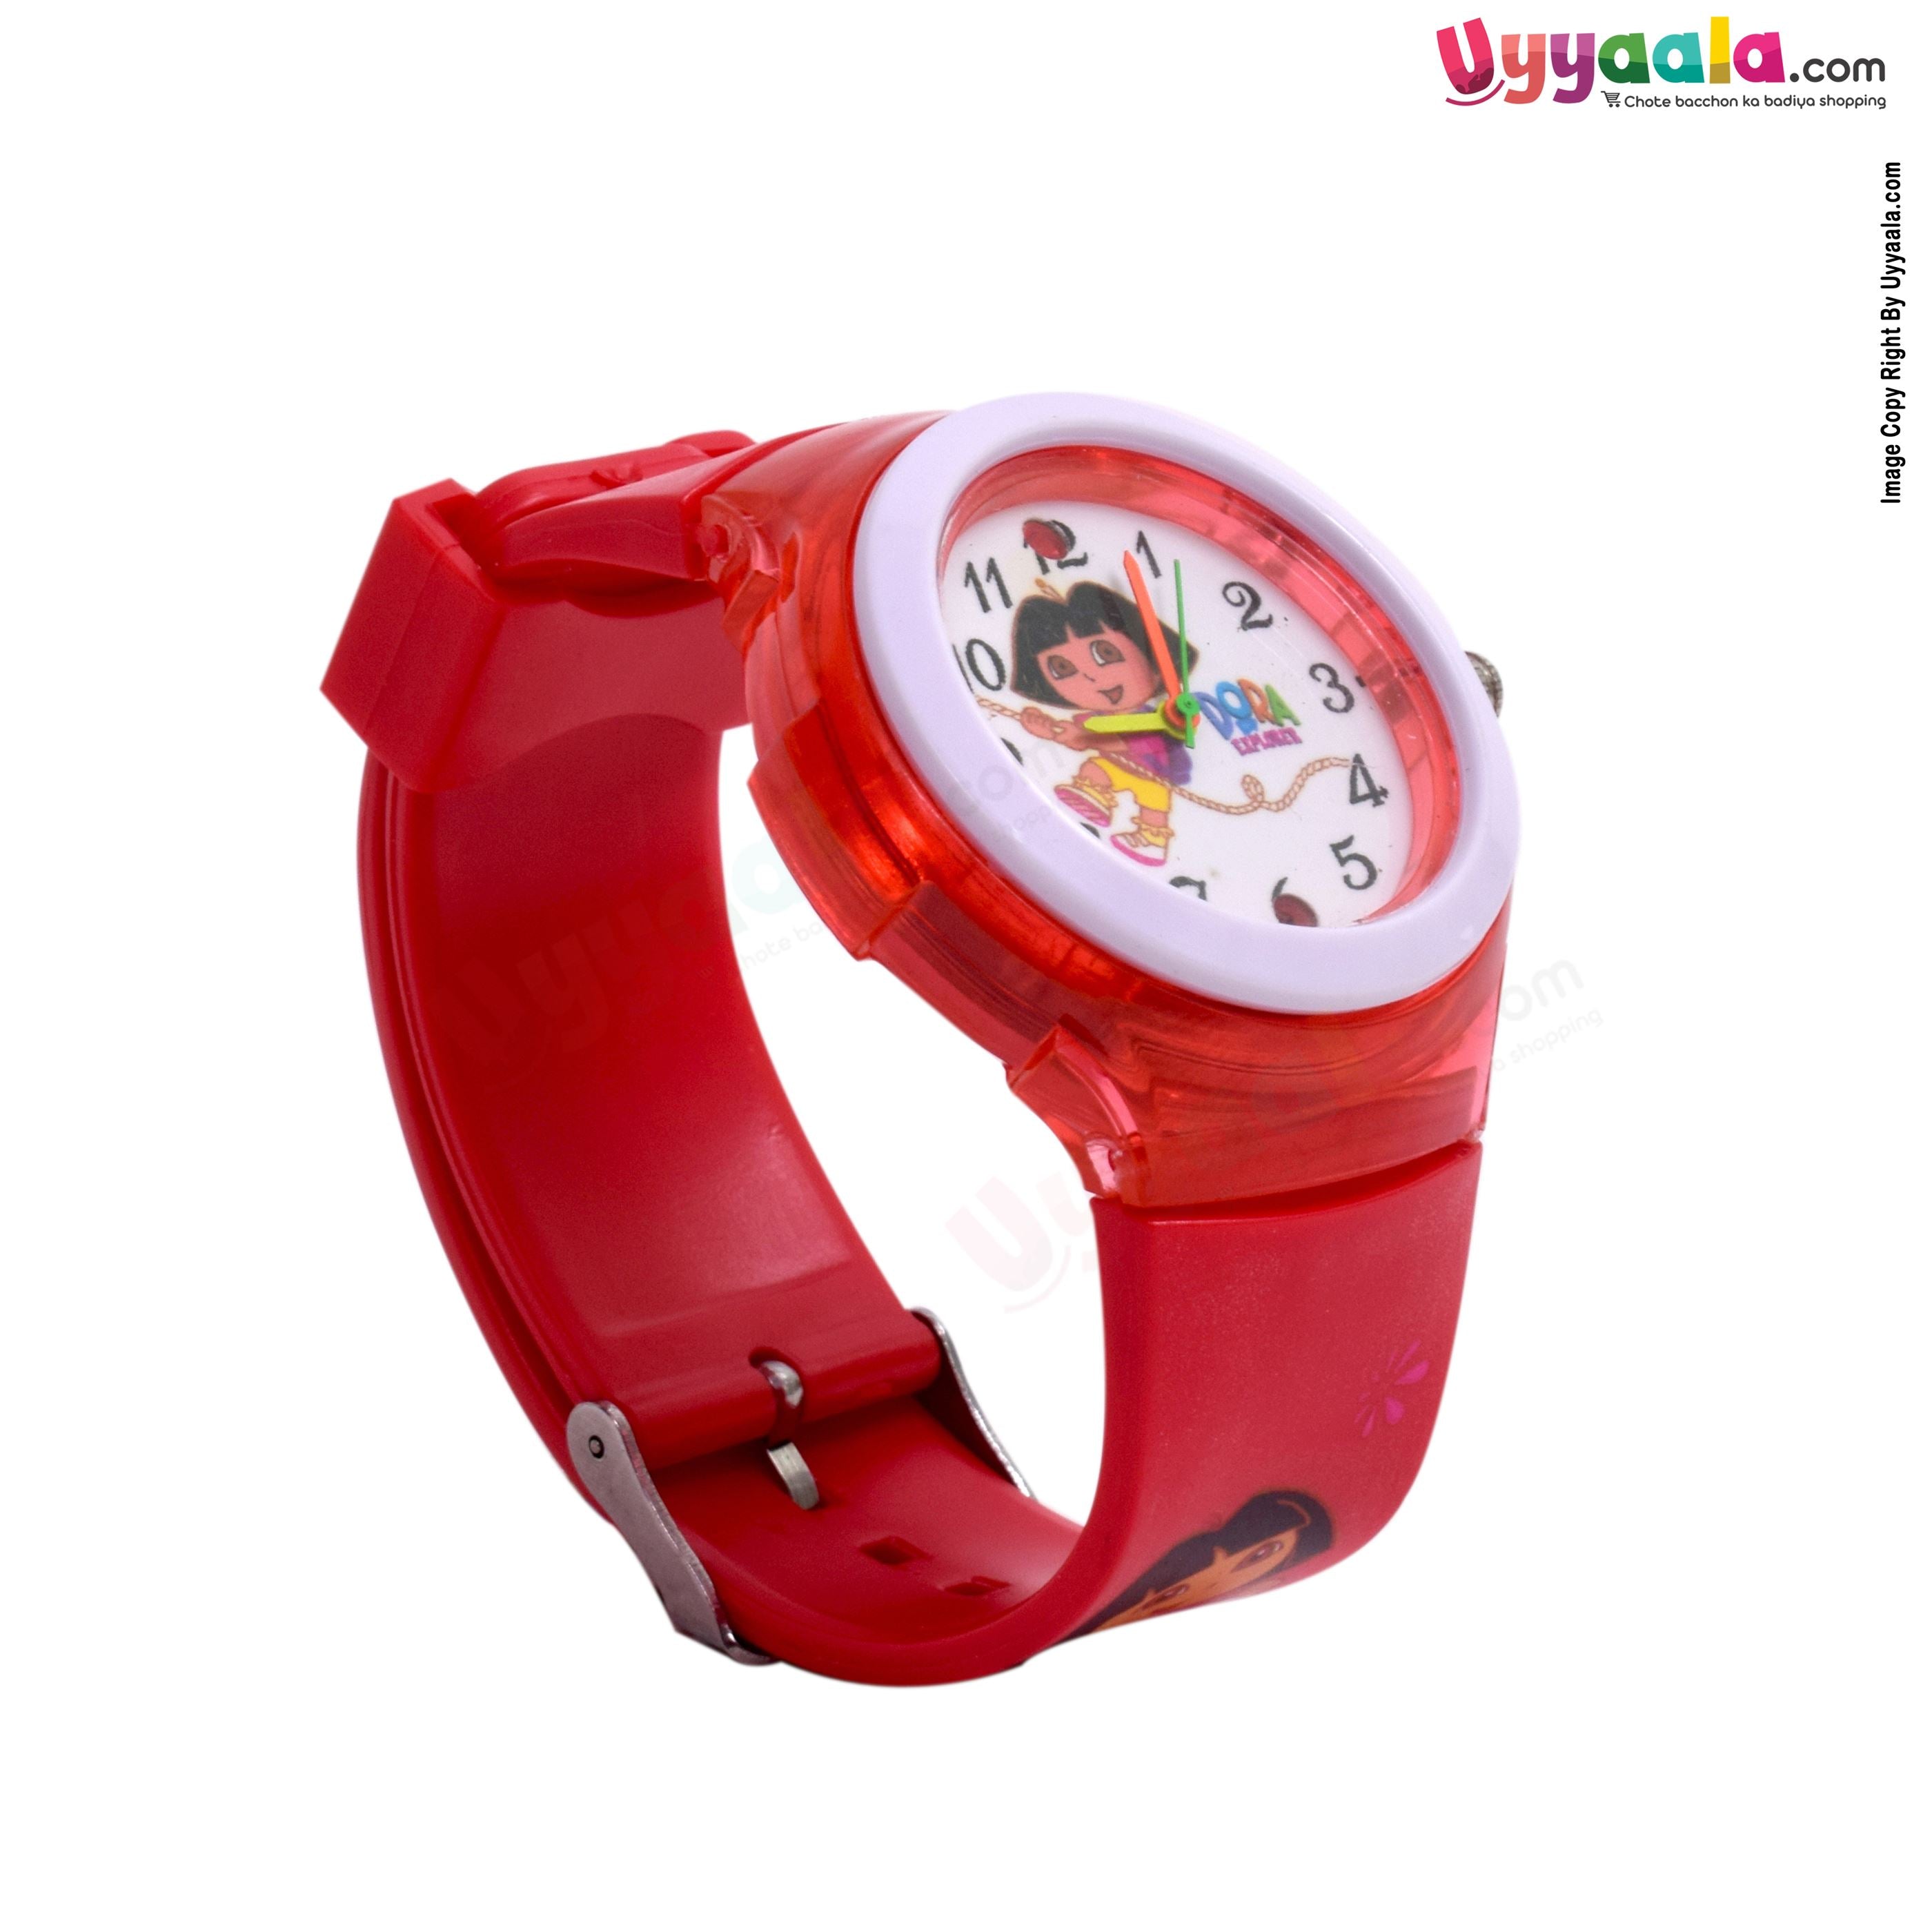 Dora analog watch with led lightnings for kids - red with dora print